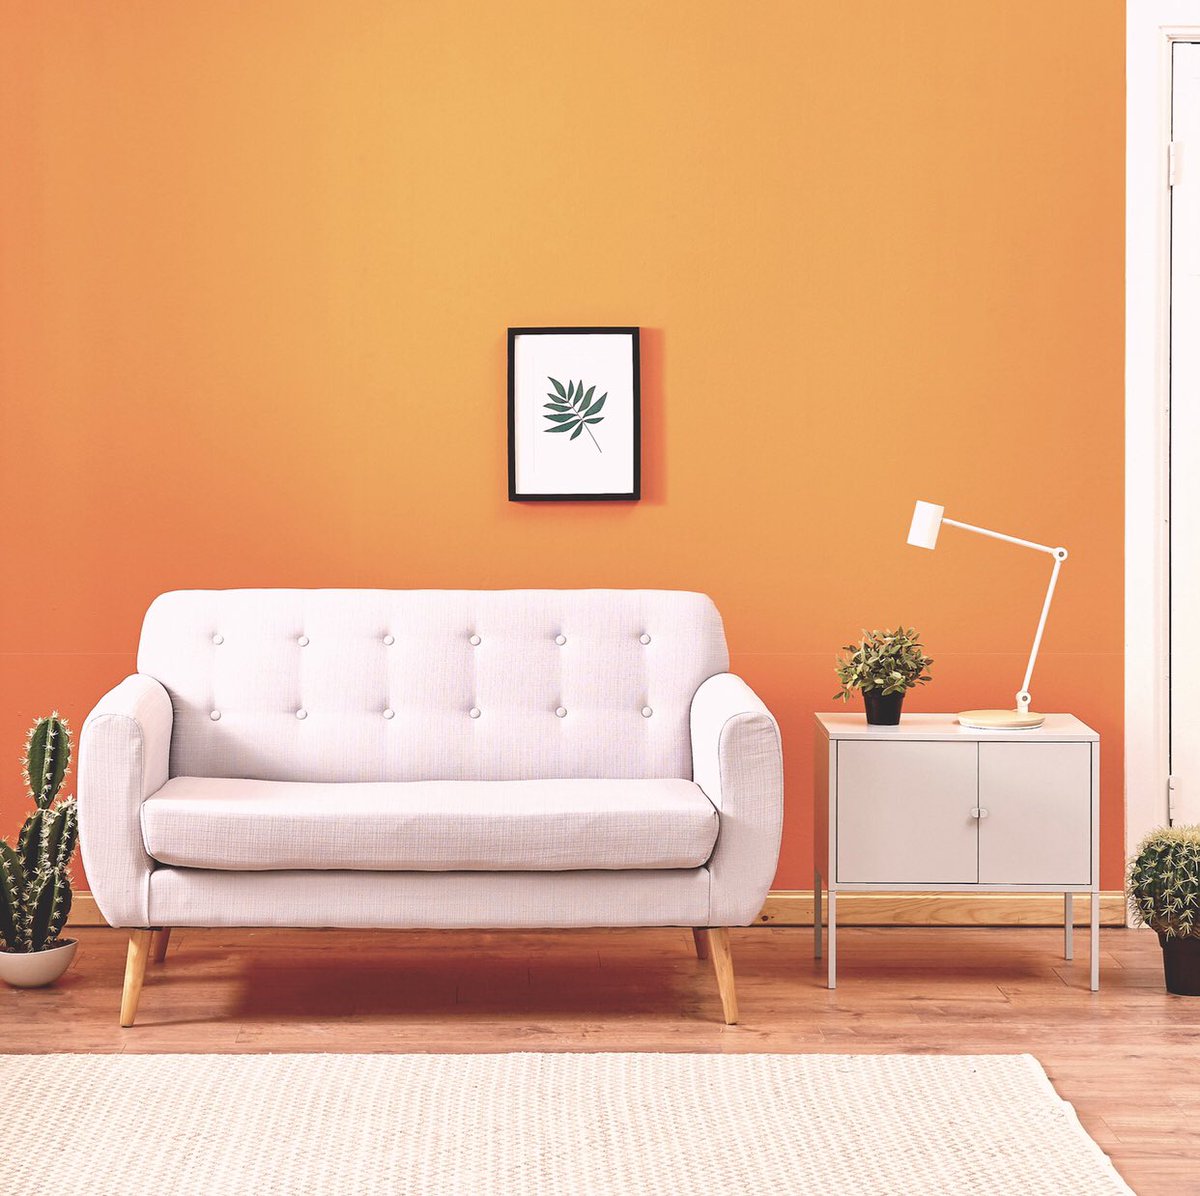 Colour of the Week is Spiced Marmalade 🧡 Our lovely customers are really loving bold hues at the moment and this 🍊 is flying off the shelves #victorycolours #colouroftheweek #colourfulhome #ecodecorating #ihavethisthingwithcolour #colourmadetheroom #newhome